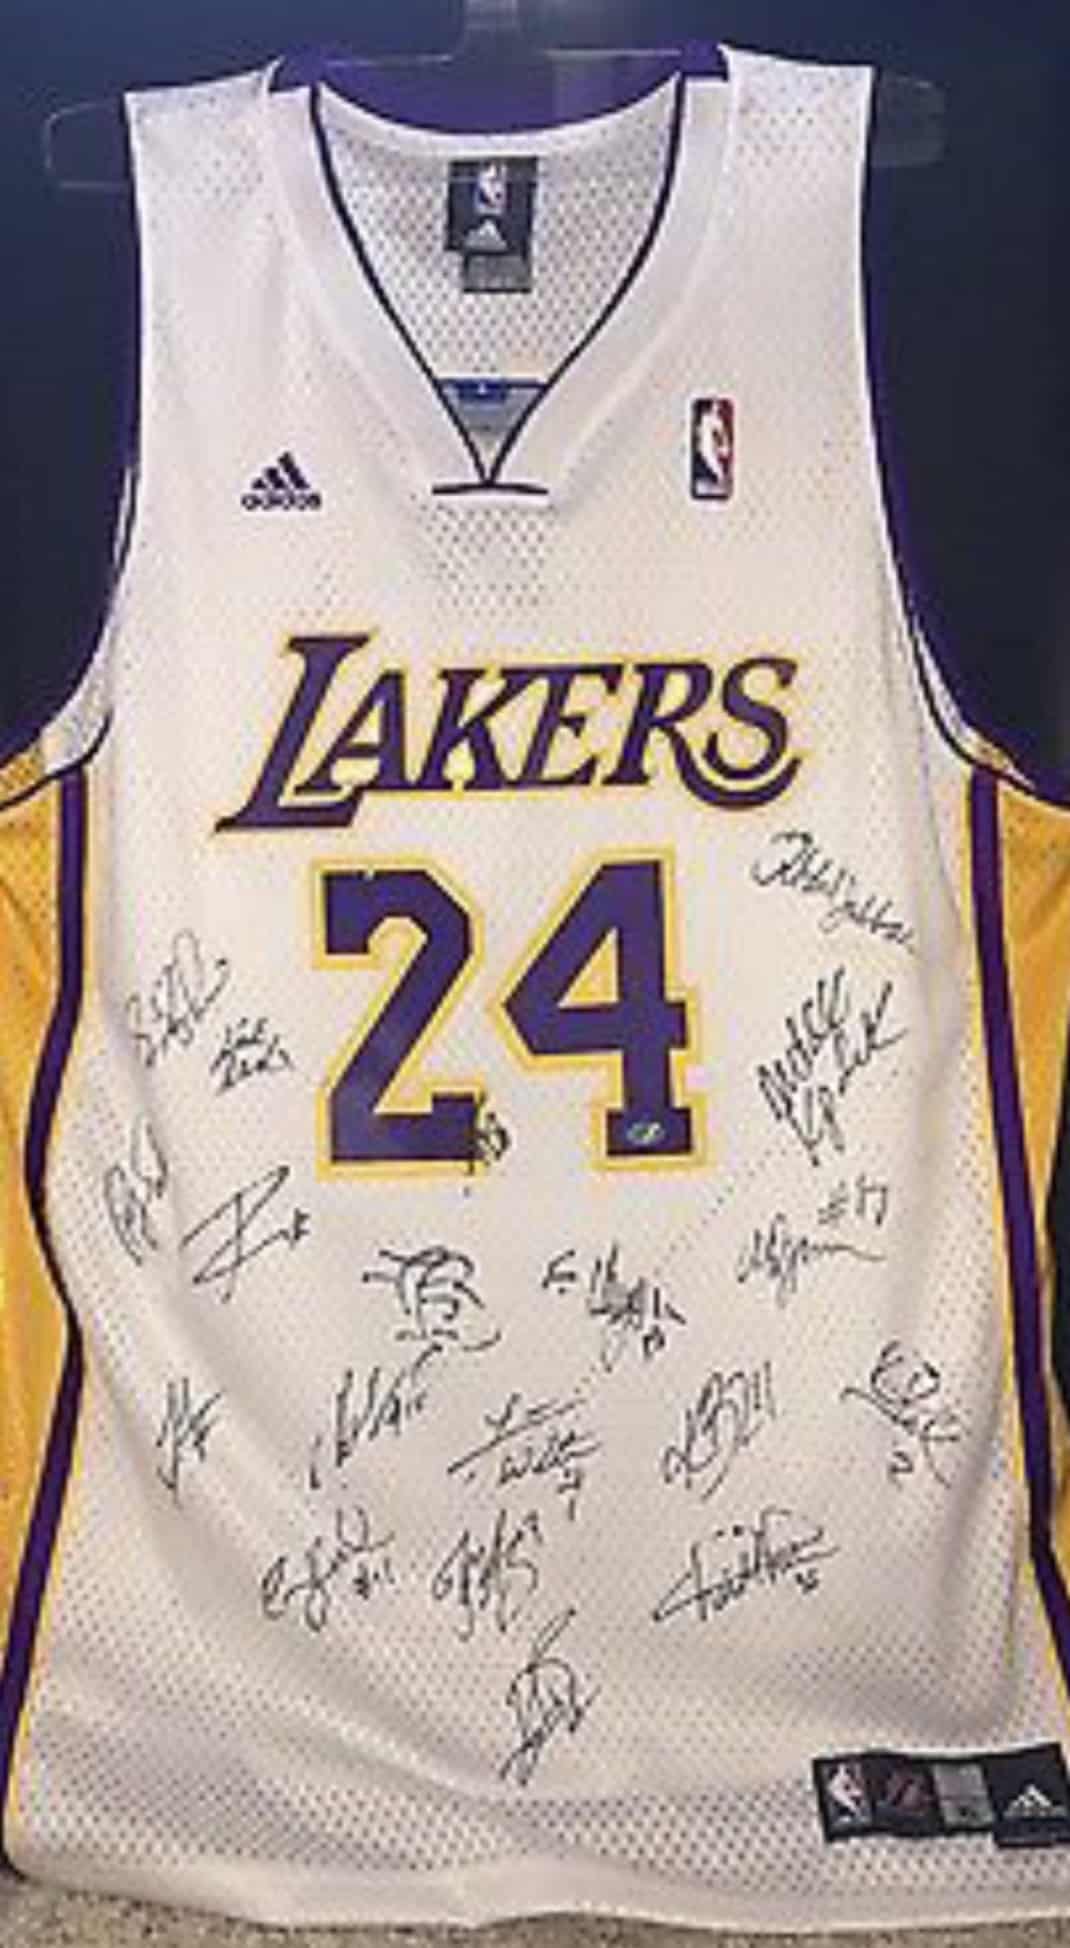 Kobe Bryant Autographed Framed Lakers Jersey